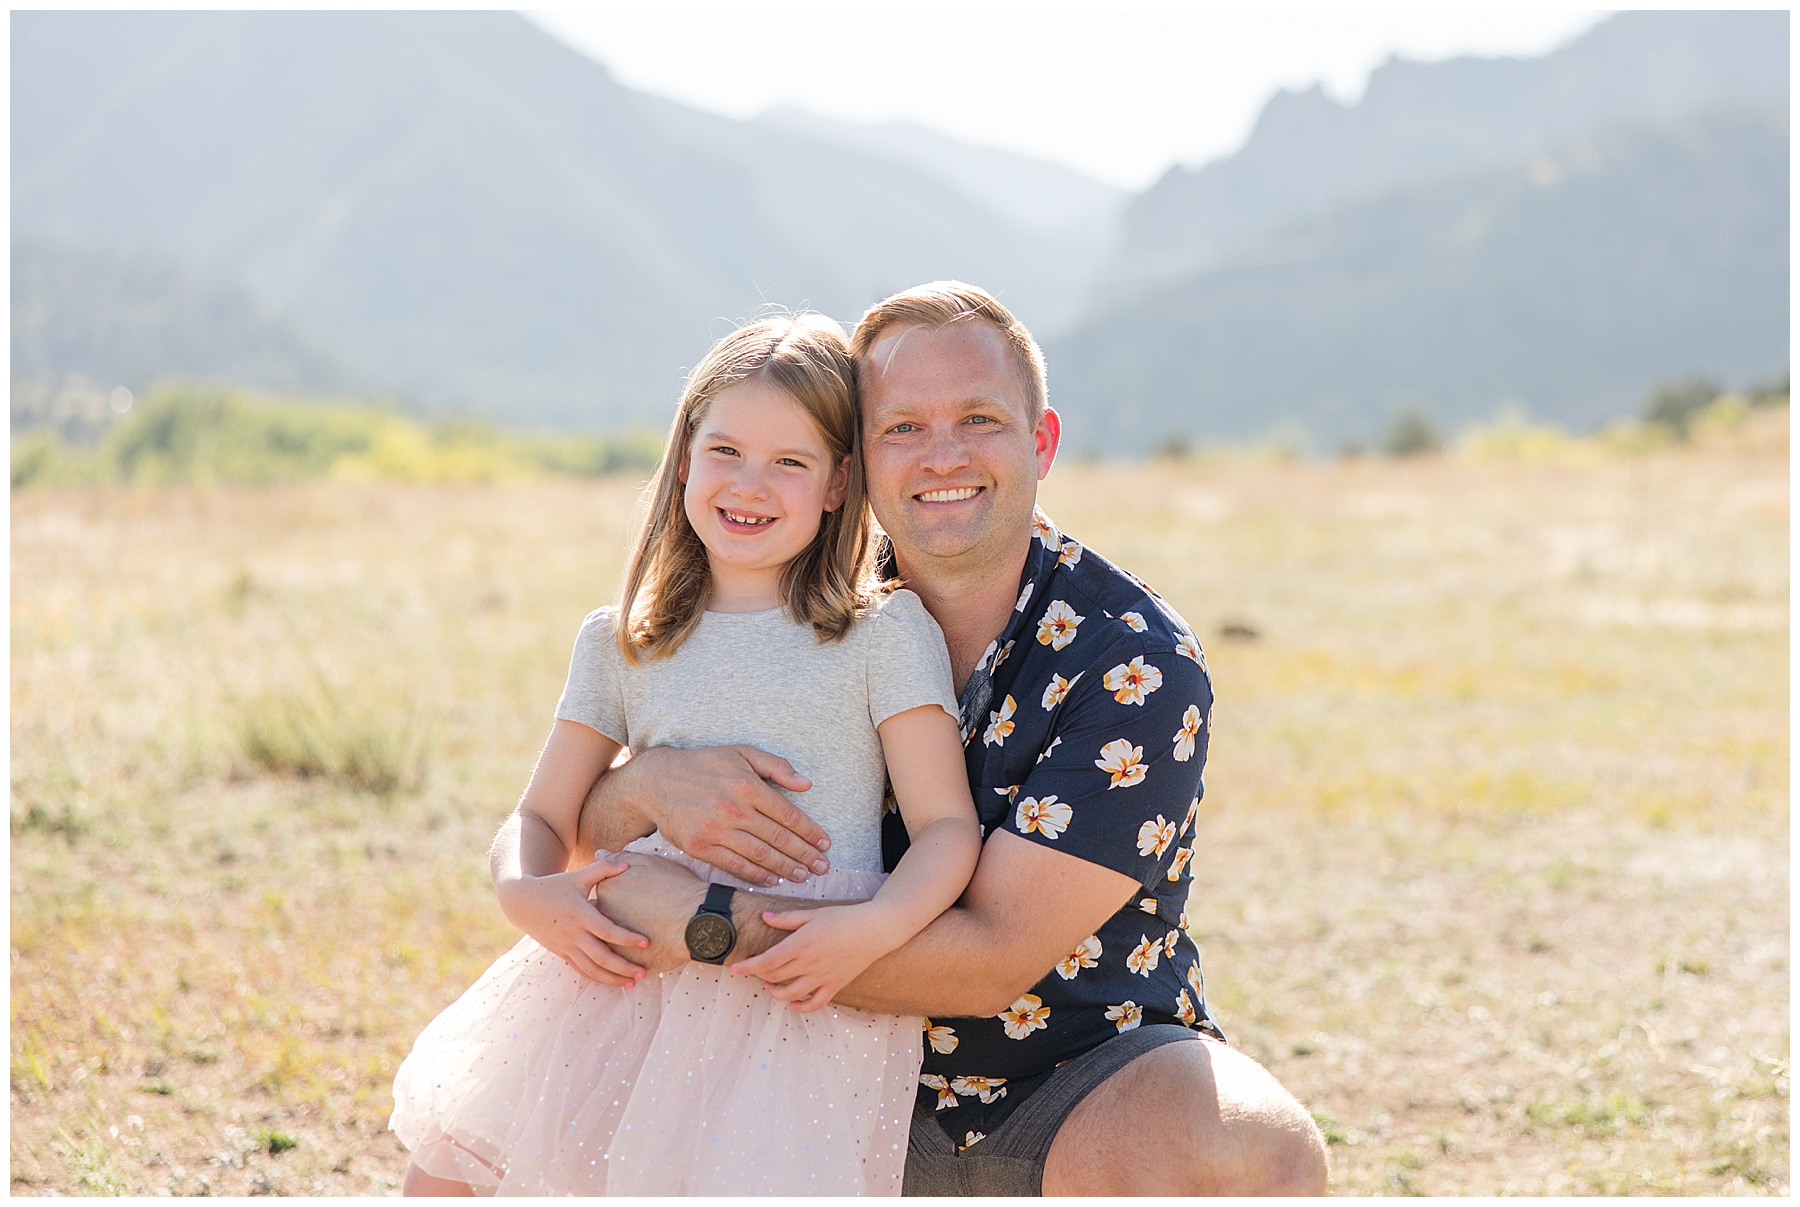 dad squatting down holding daughter on his knee for a fall photo at South Mesa Trailhead